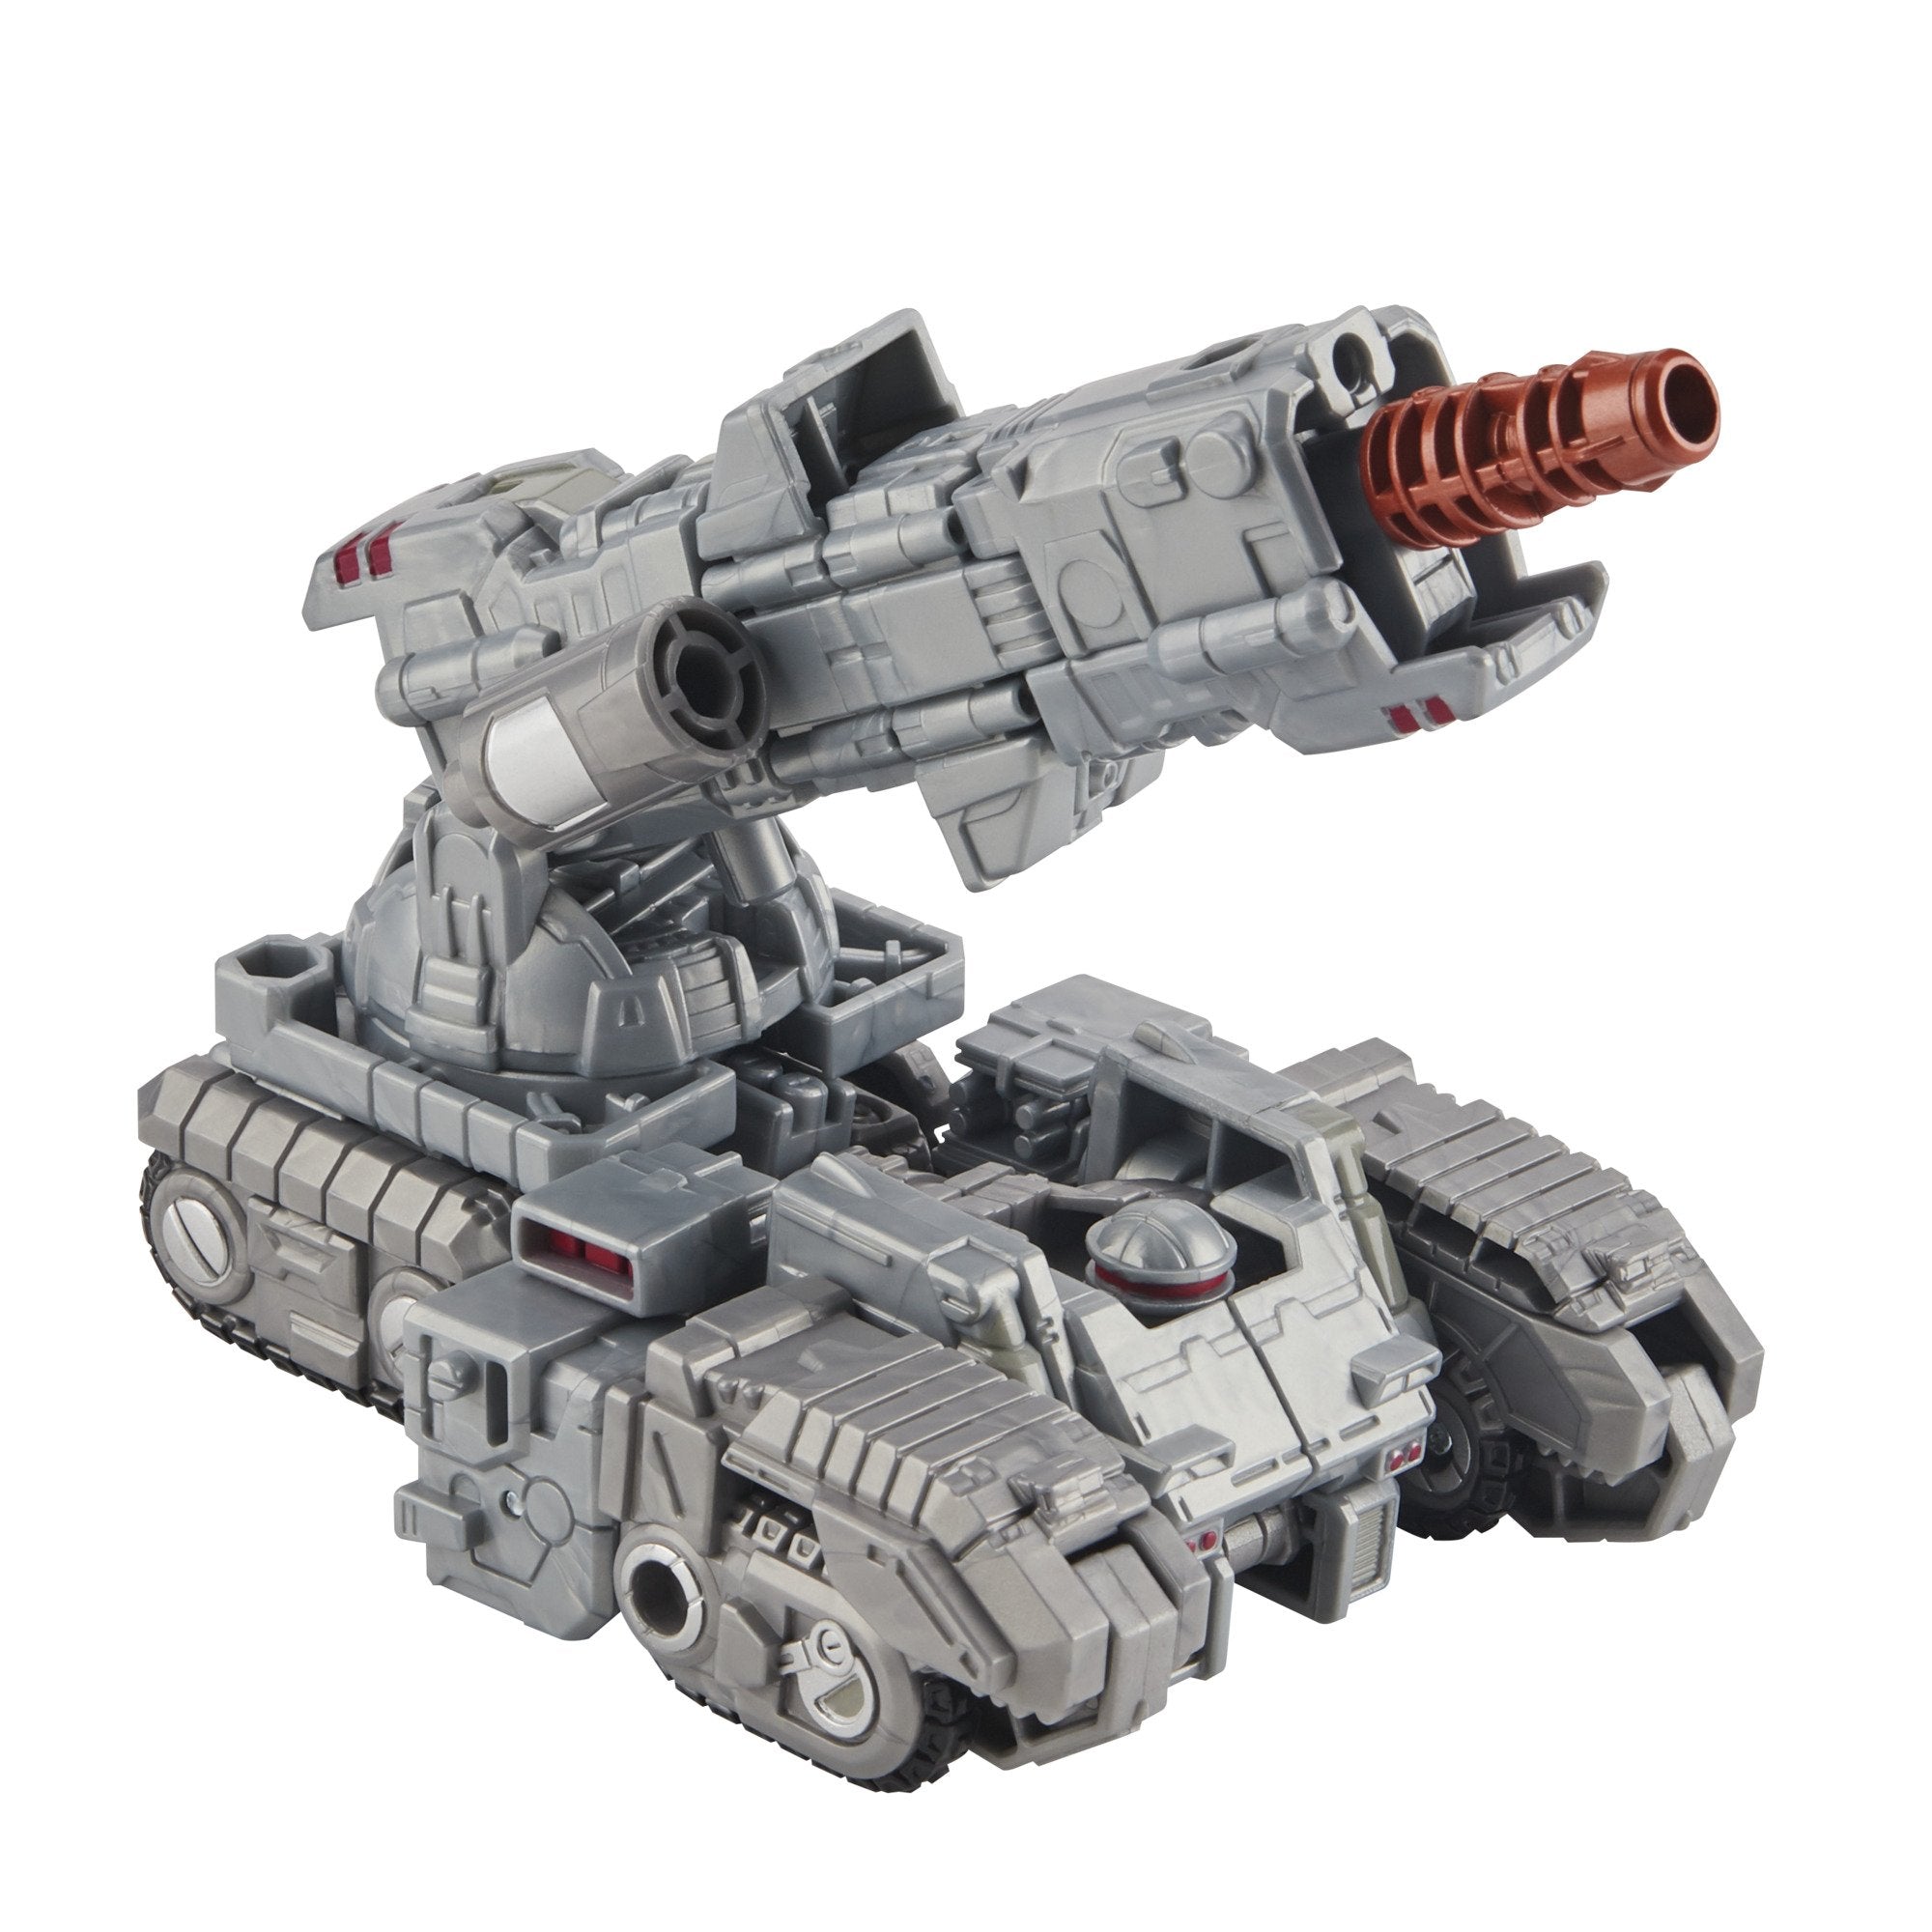 Hasbro - Transformers Generations - War for Cybertron - Deluxe Centurion Drone Weaponizer Pack - Marvelous Toys